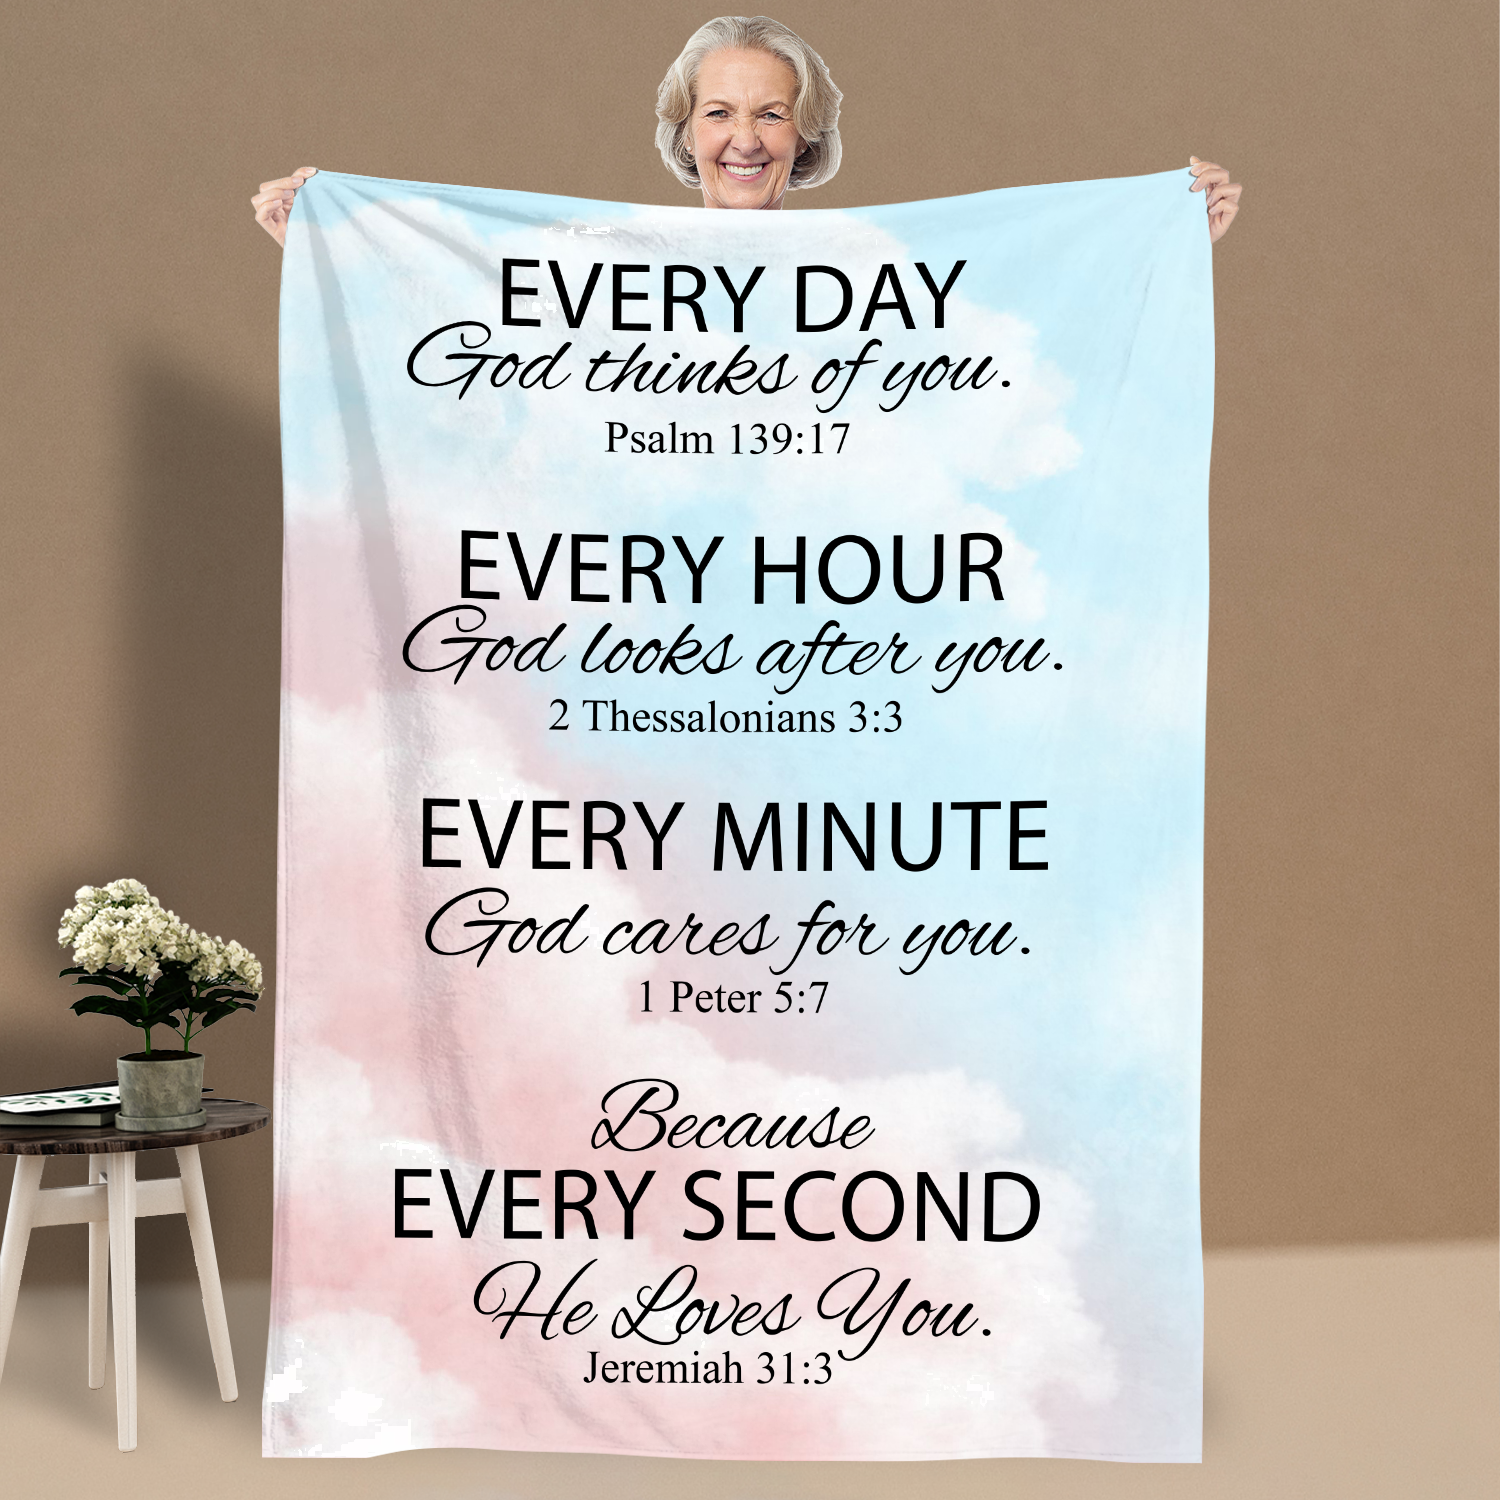 Bible Verse Blanket with Inspirational Thoughts and Prayers- Religious Throw Fleece Blanket